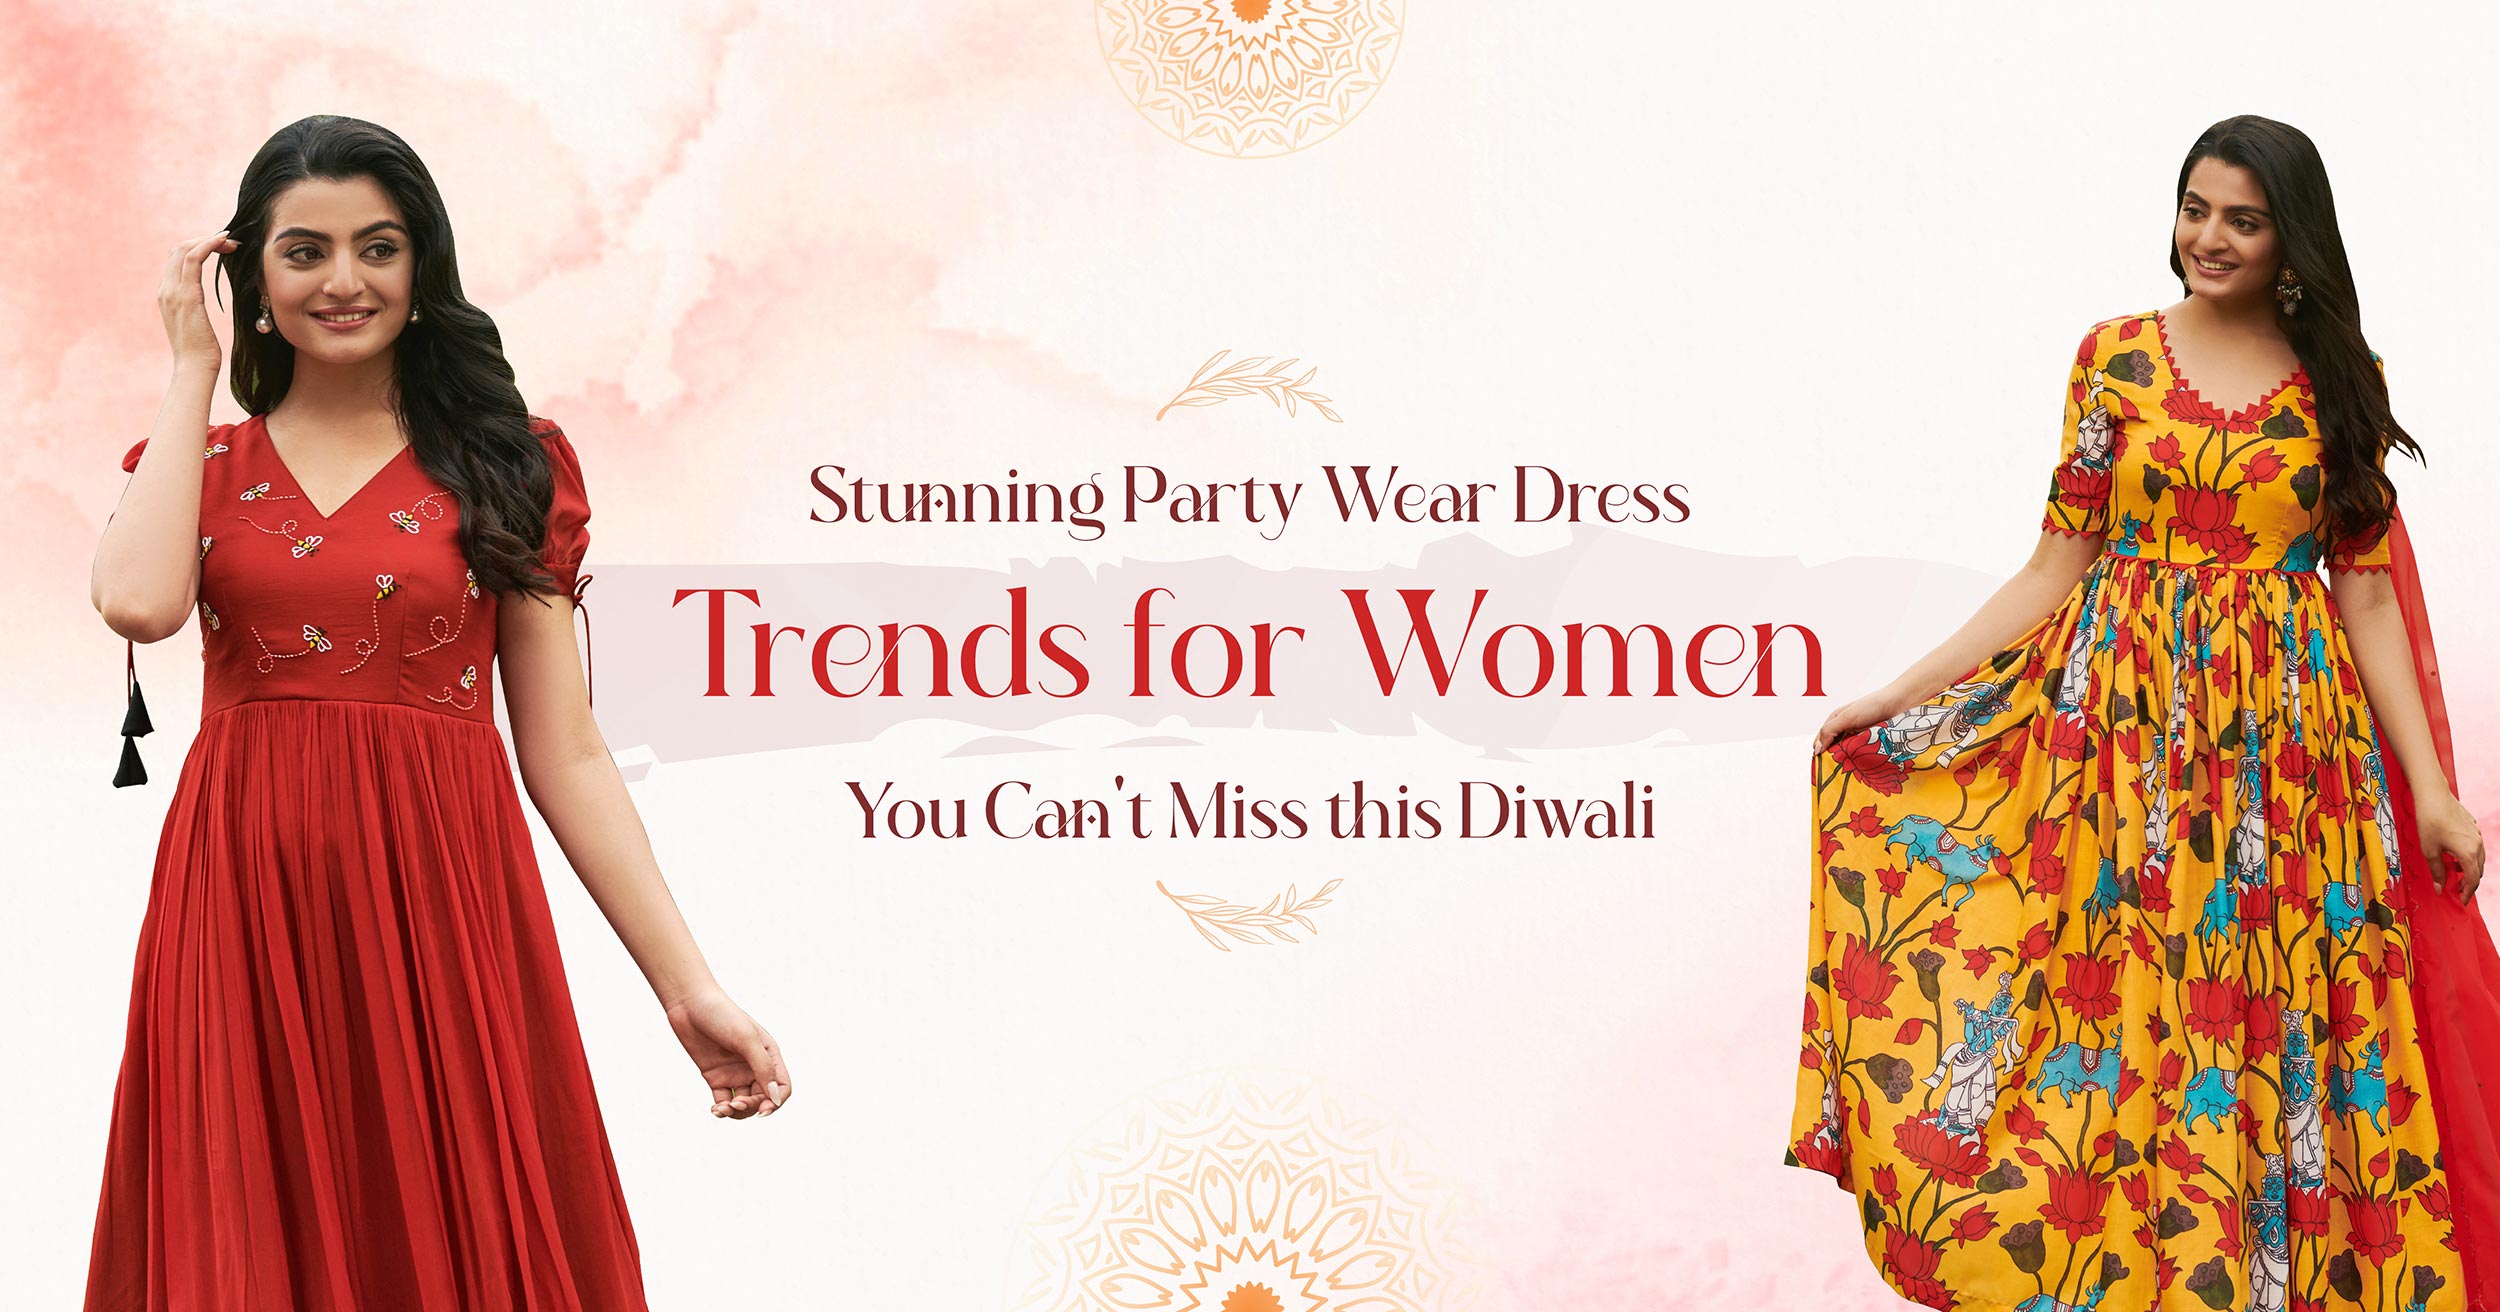 Stunning Party Wear Dress Trends for Women You Cant Miss this Diwali